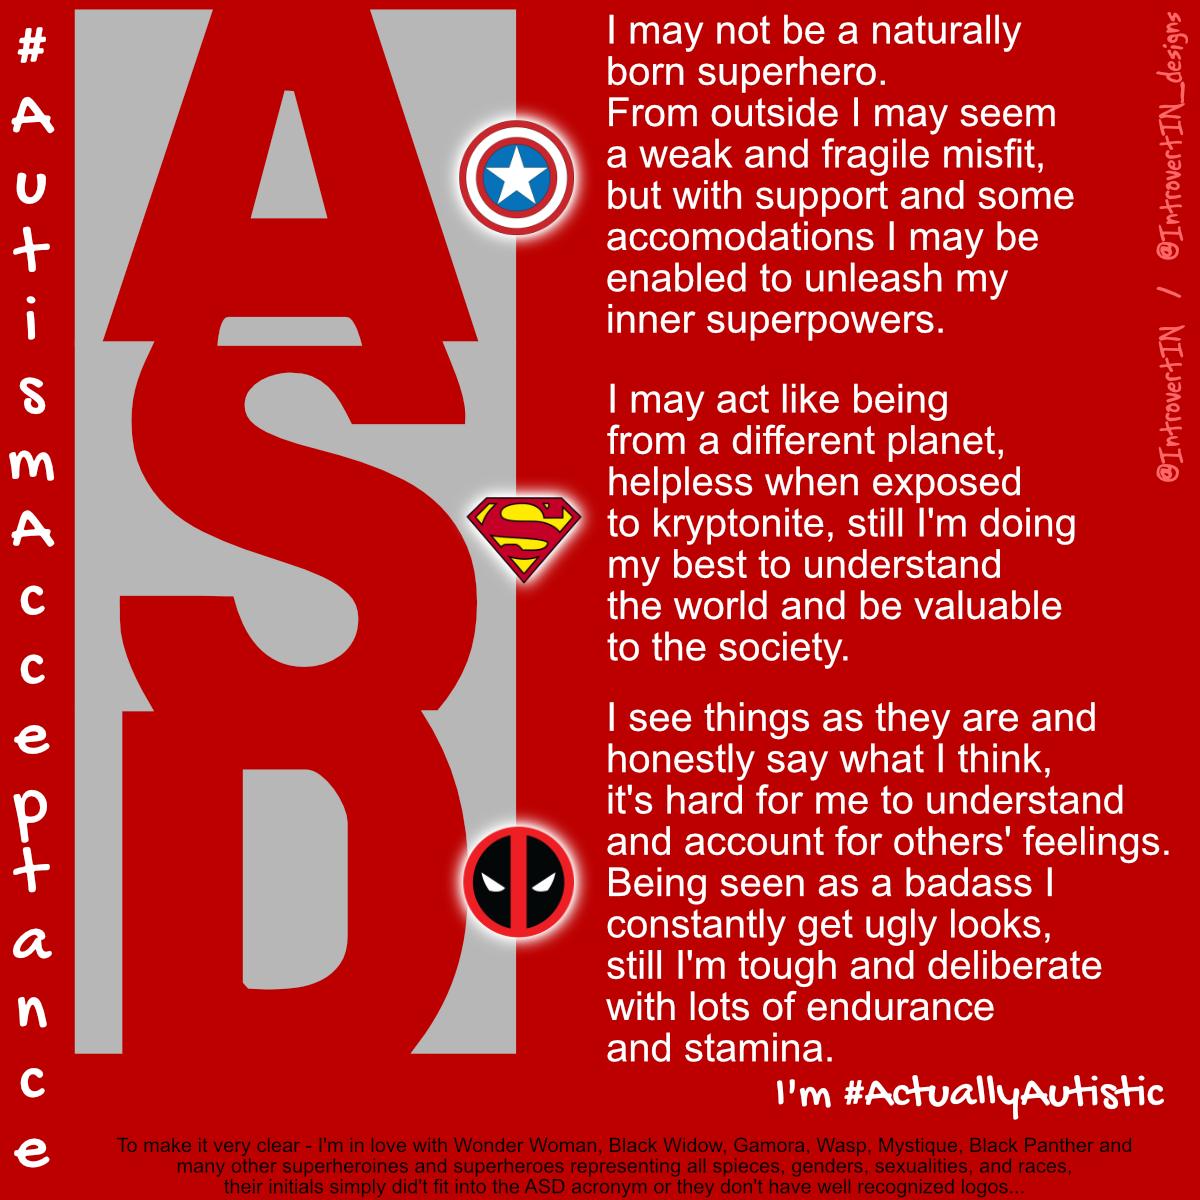 Learning about #Autism allowed me to understand so many things and struggle in my life. I wish I had known earlier - I'm #ActuallyAutistic #AutismAwarenessDay #AutismAwarenessMonth #AutismAcceptance #AutismAwarenessWeek #AutismAcceptanceDay #AutismAcceptanceMonth #asd #Asperger